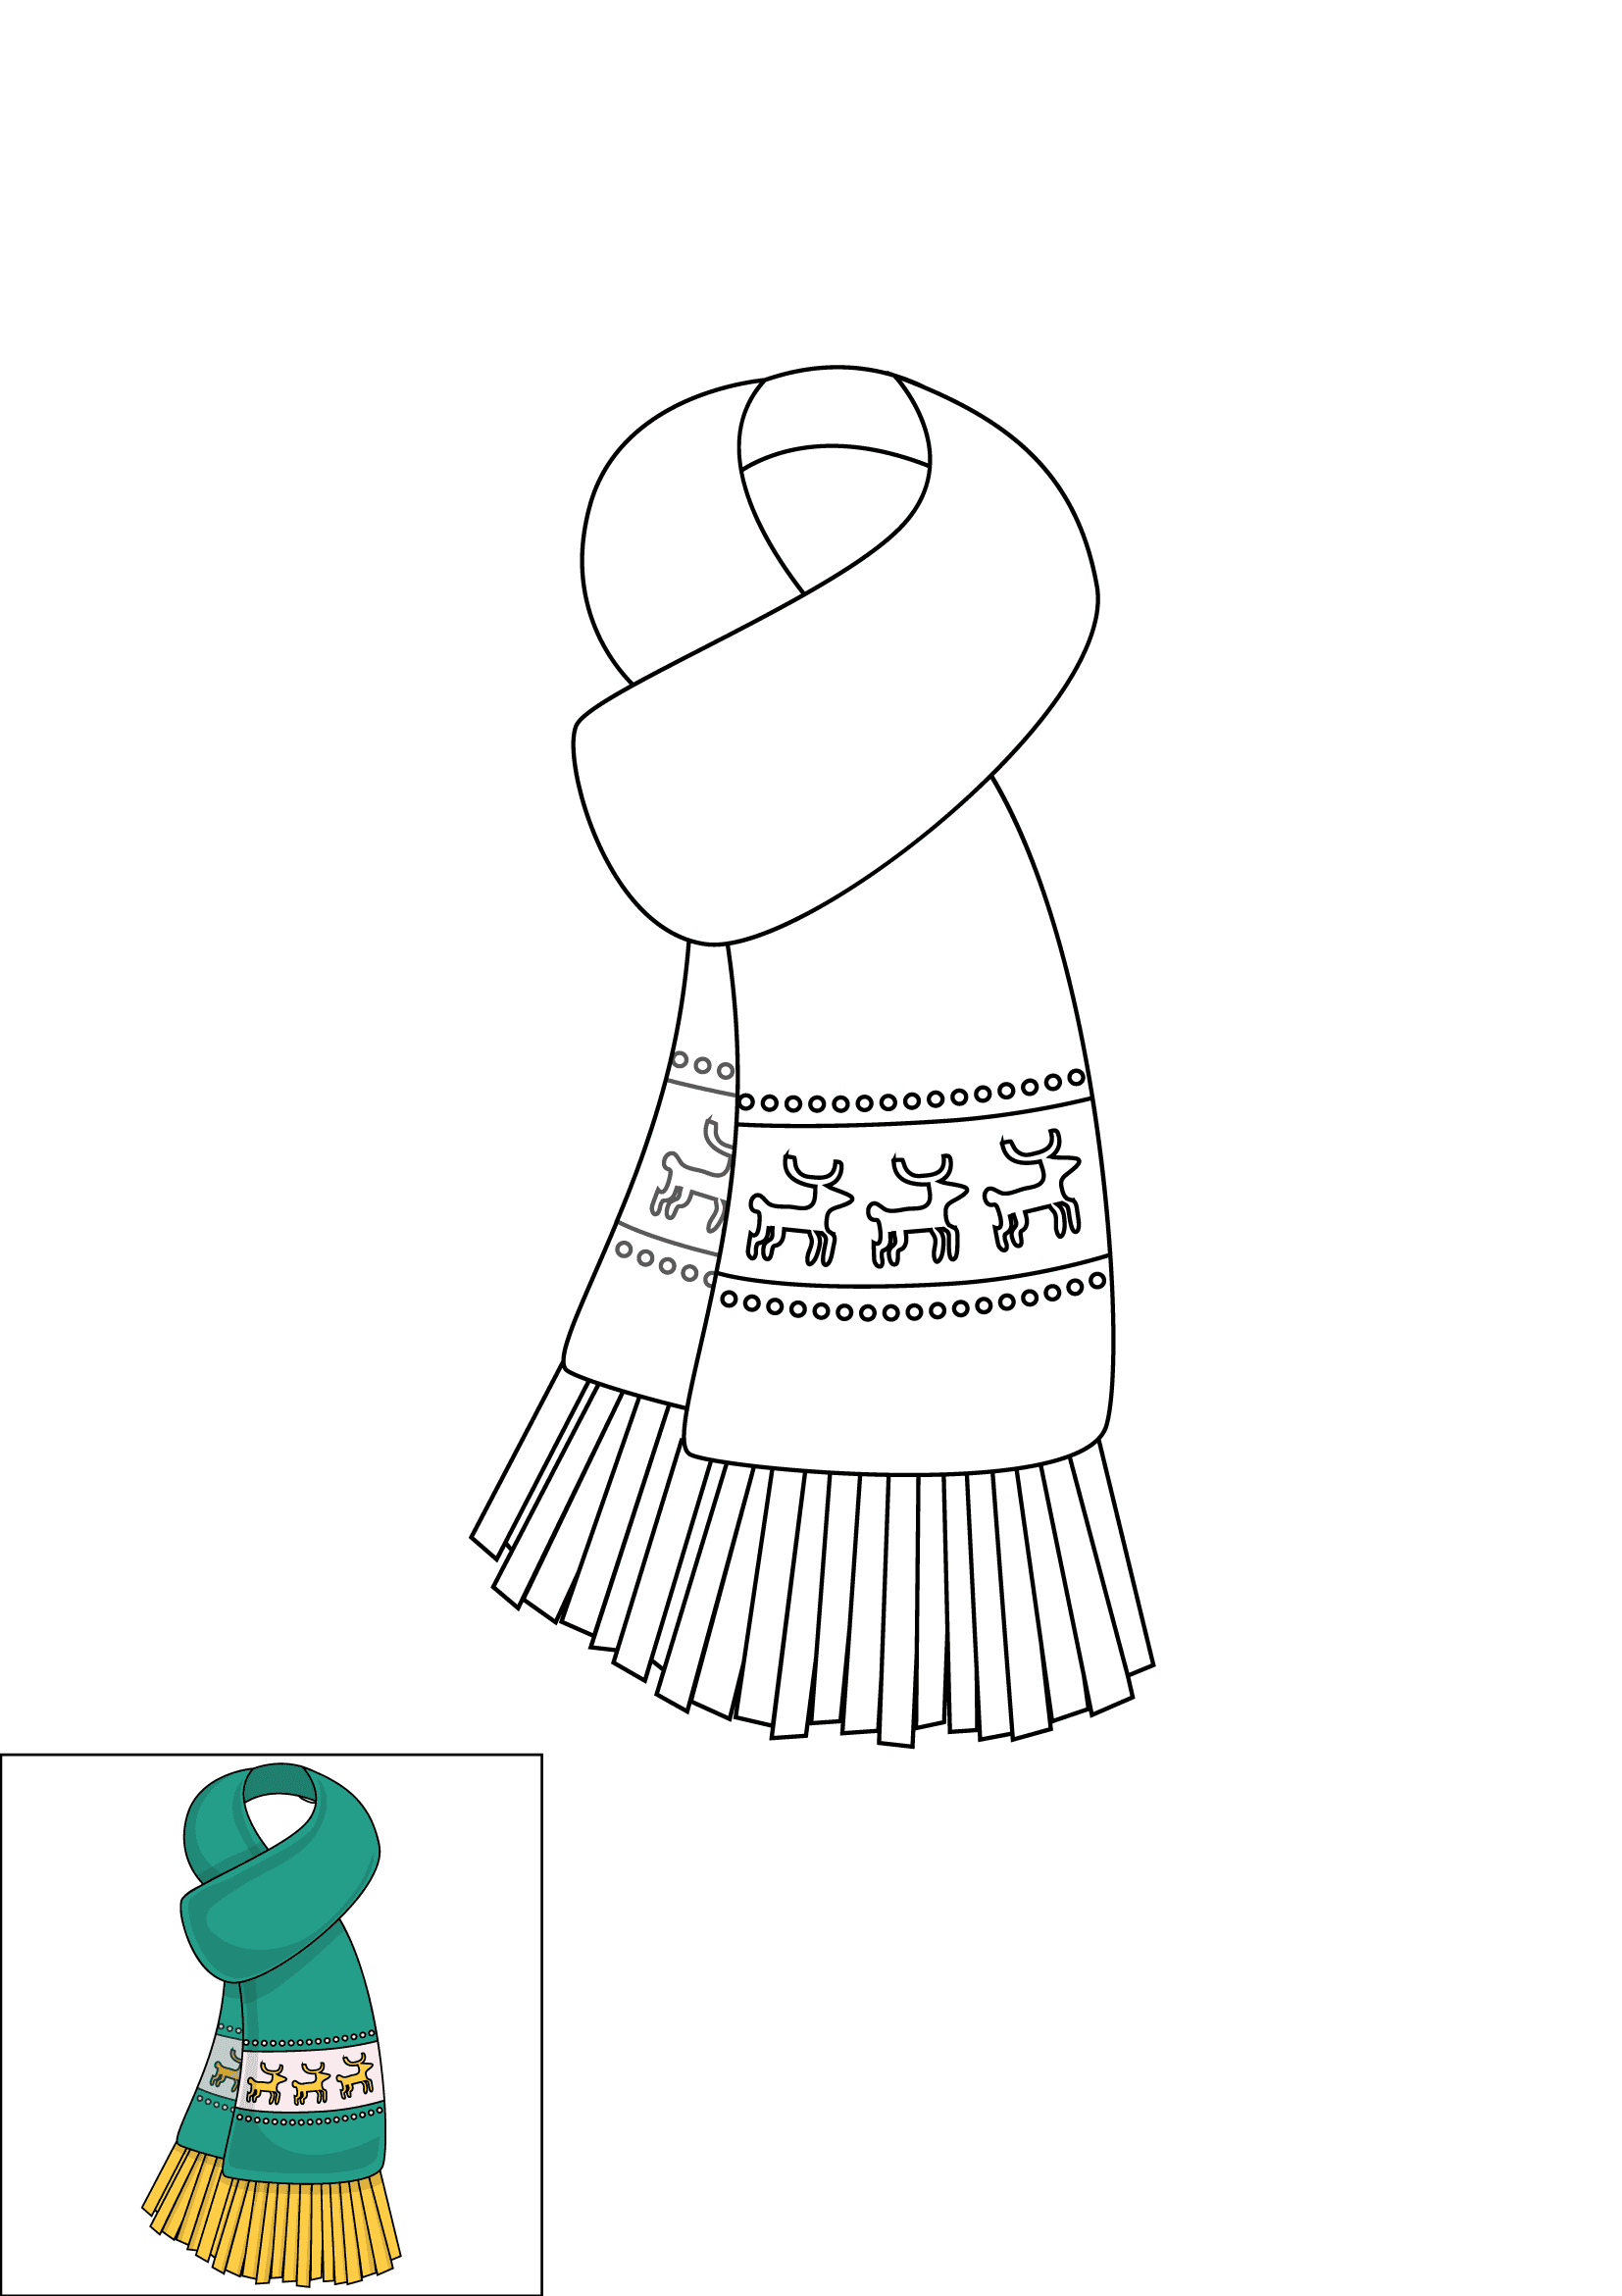 How to Draw A Scarf Step by Step Printable Color